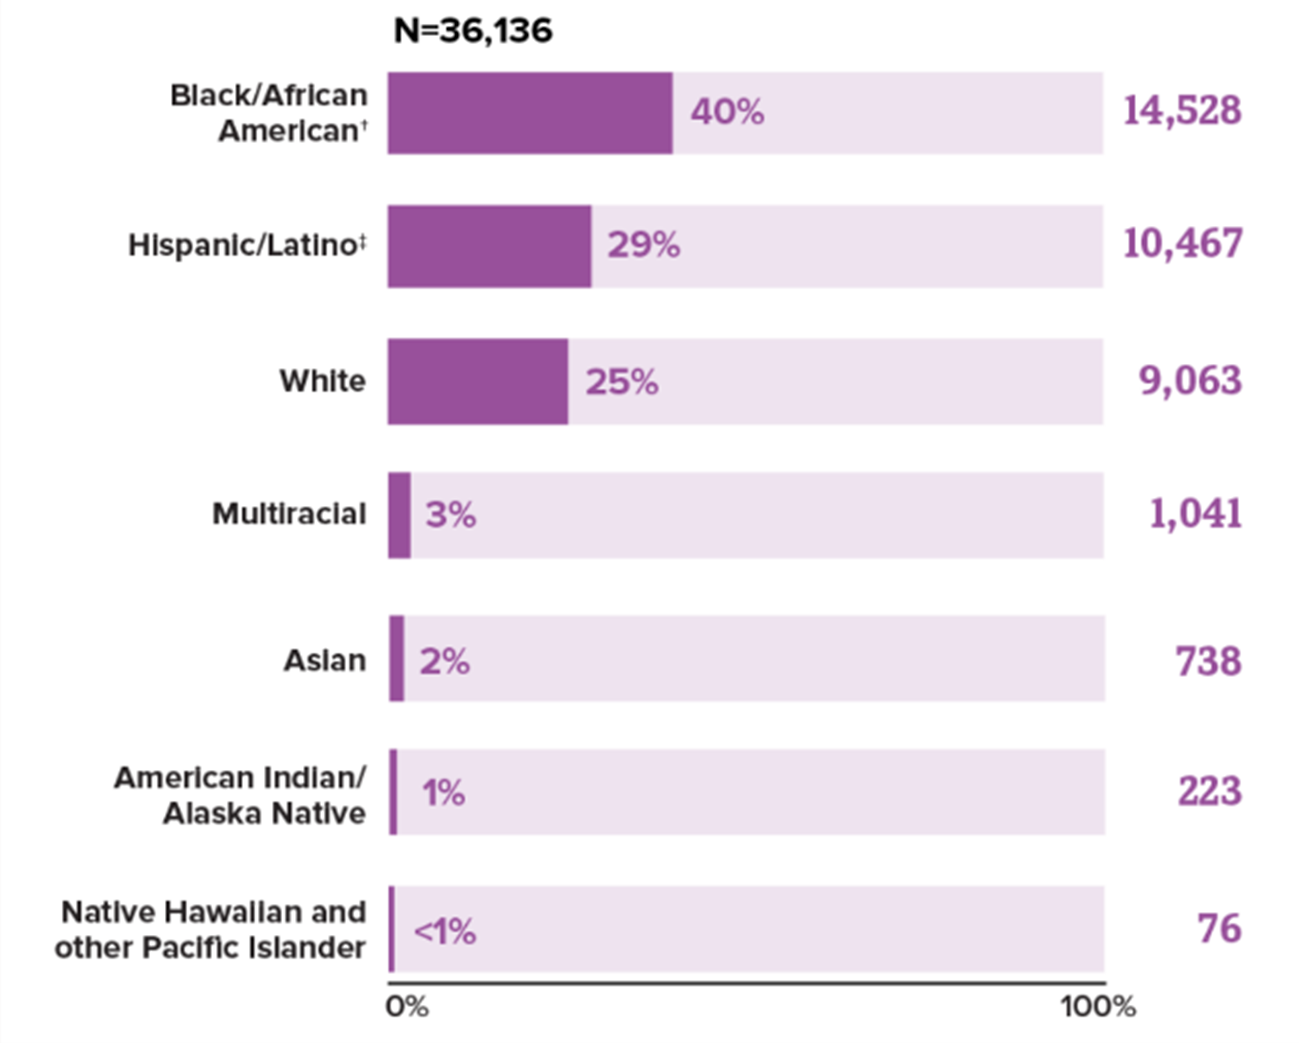 New HIV Diagnoses in the US and Dependent Areas by Race/Ethnicity, 2019